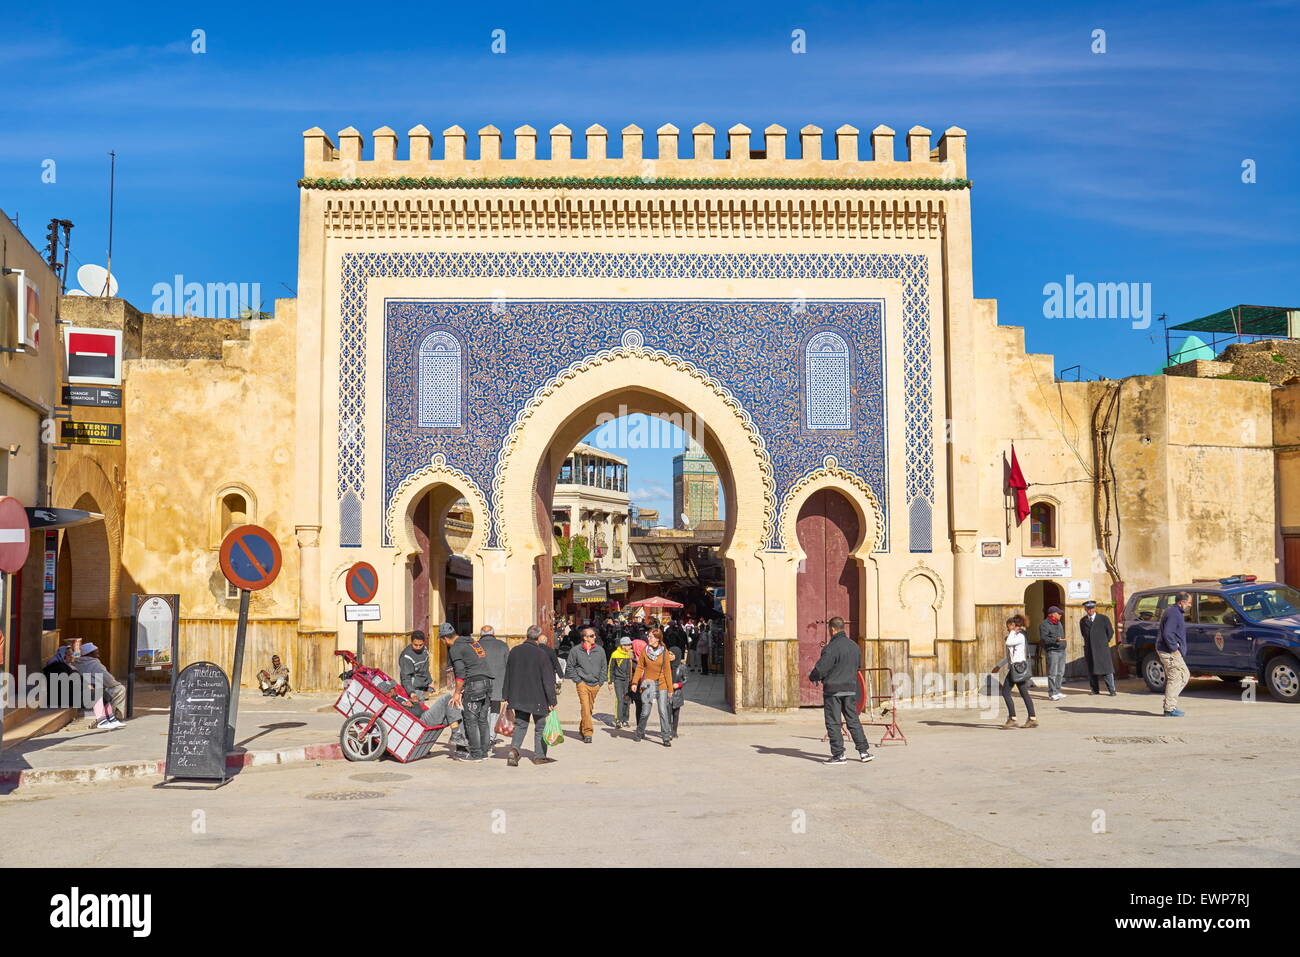 Fez Medina, Bab Bou Jeloud Gate one of the most magnificent gates leading to the Medina, Morocco, Africa Stock Photo